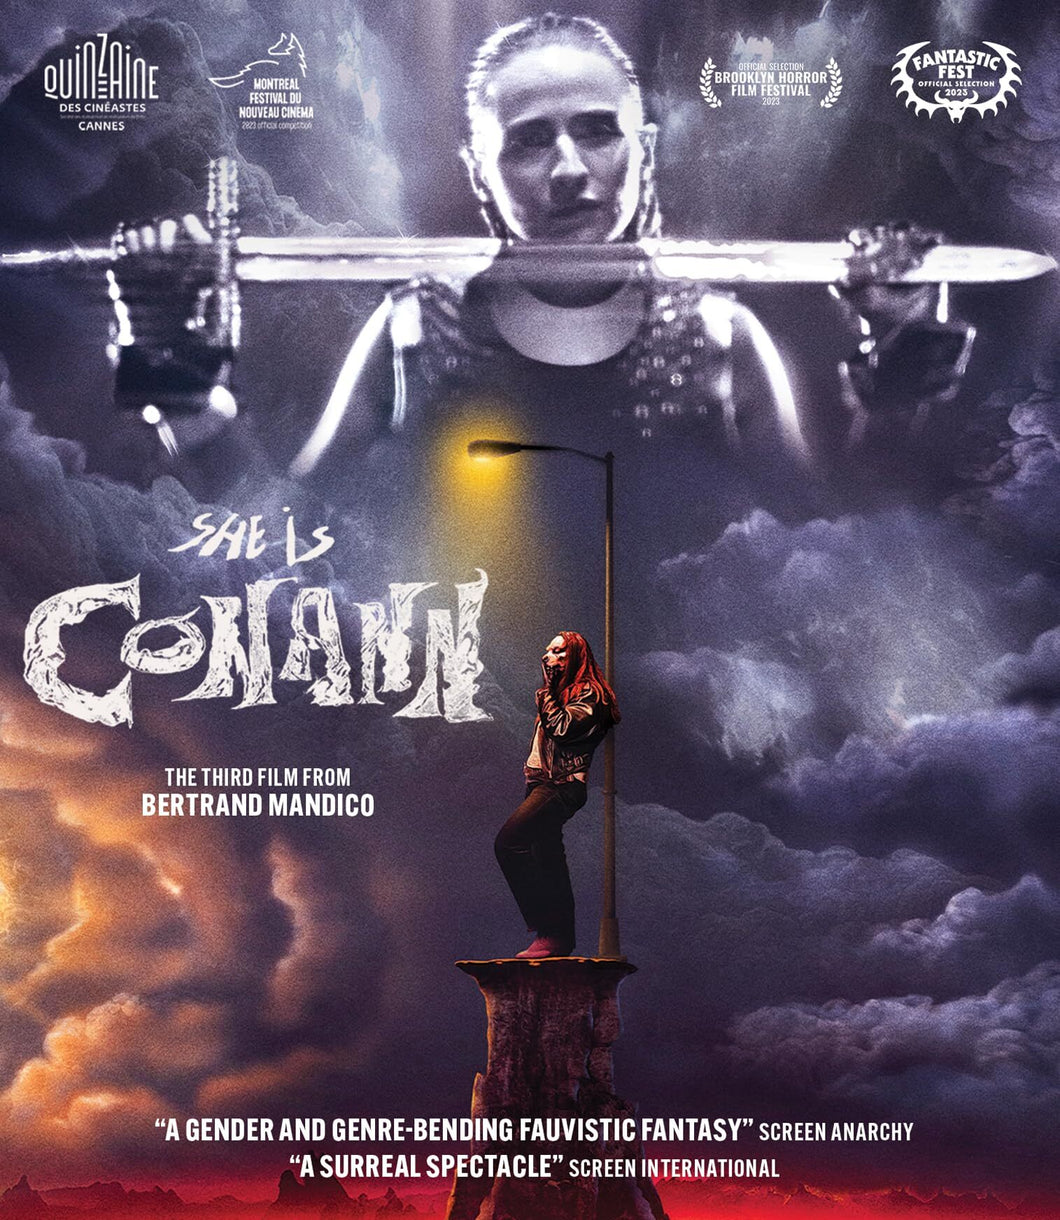 She Is Conann (VF) - front cover